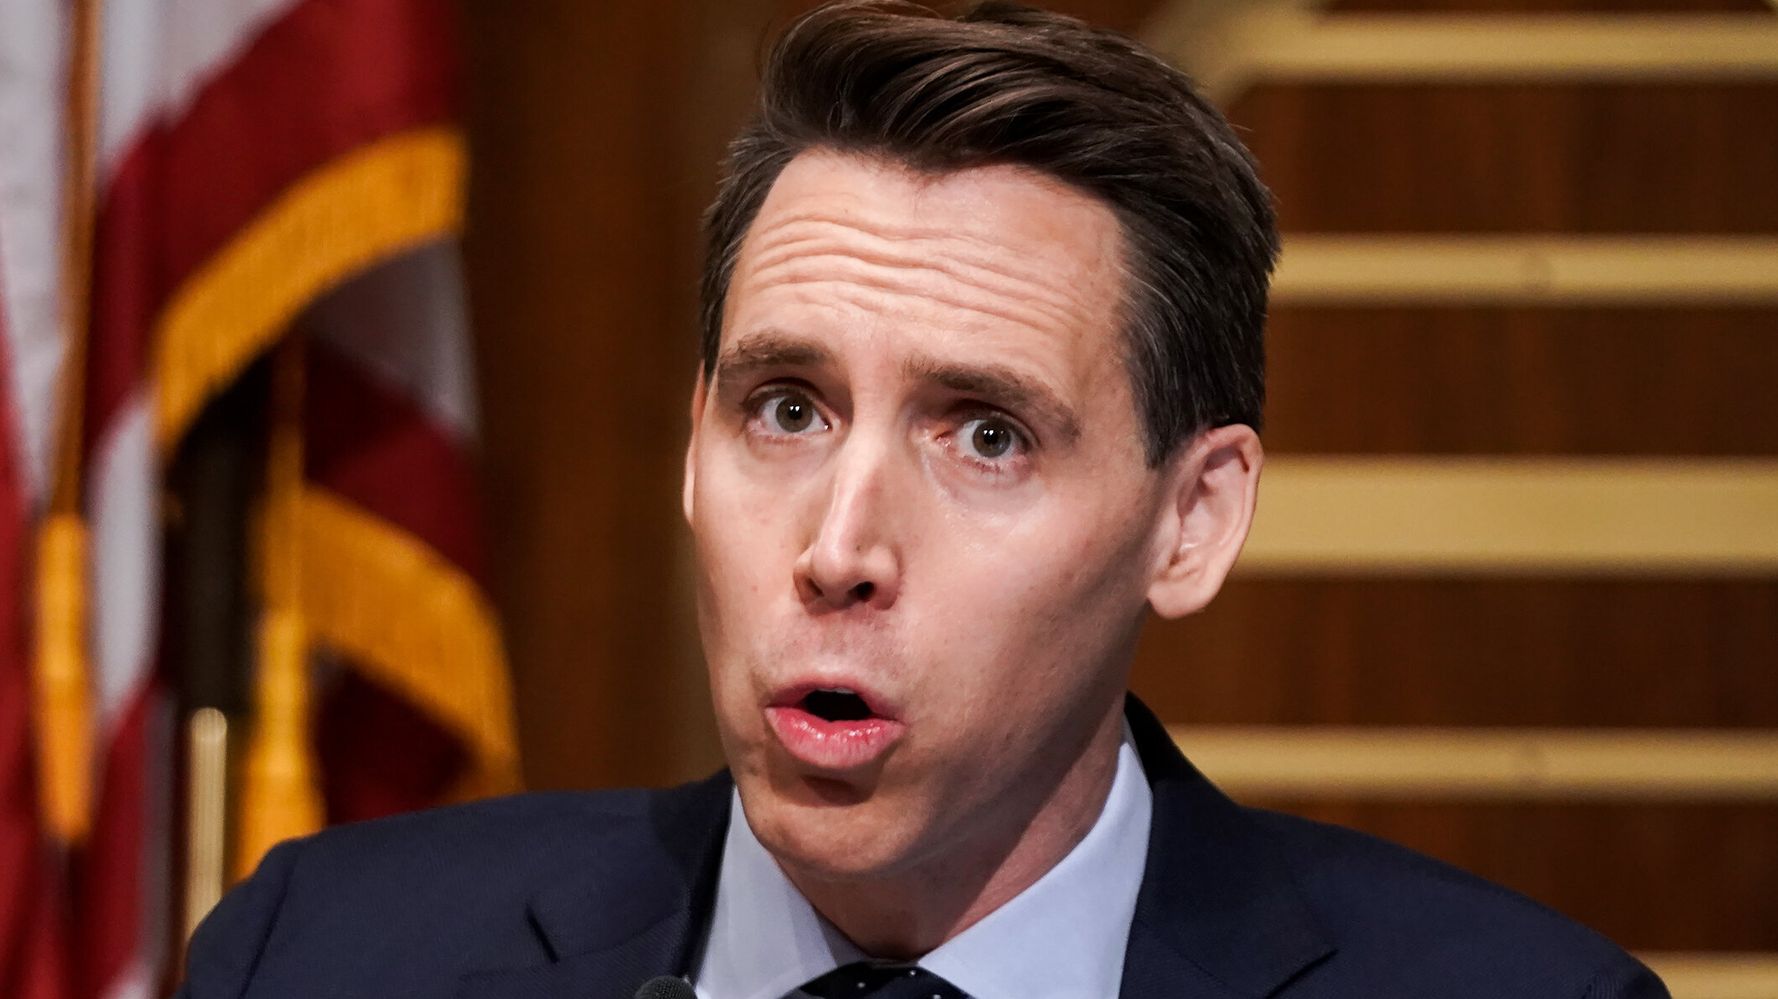 Josh Hawley S Latest Hypocritical Complaint Mocked By Left And Right Alike Huffpost